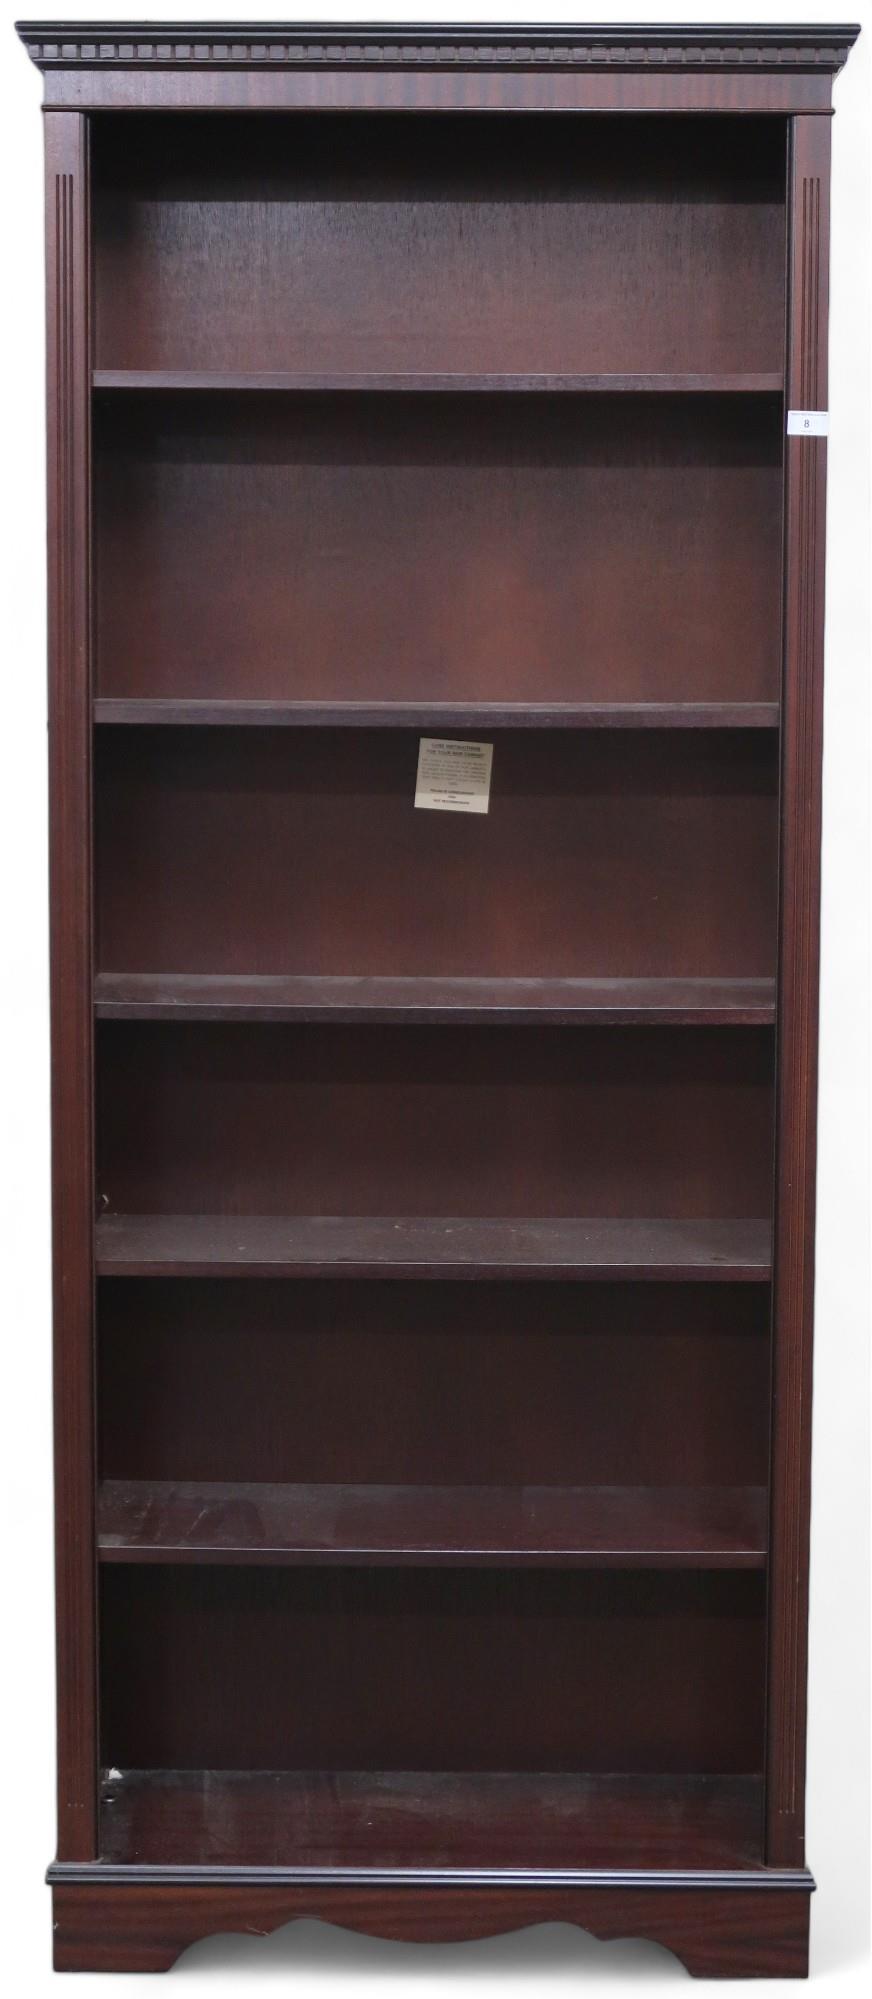 A 20th century mahogany veneered open bookcase with dentil cornice over five adjustable shelves on